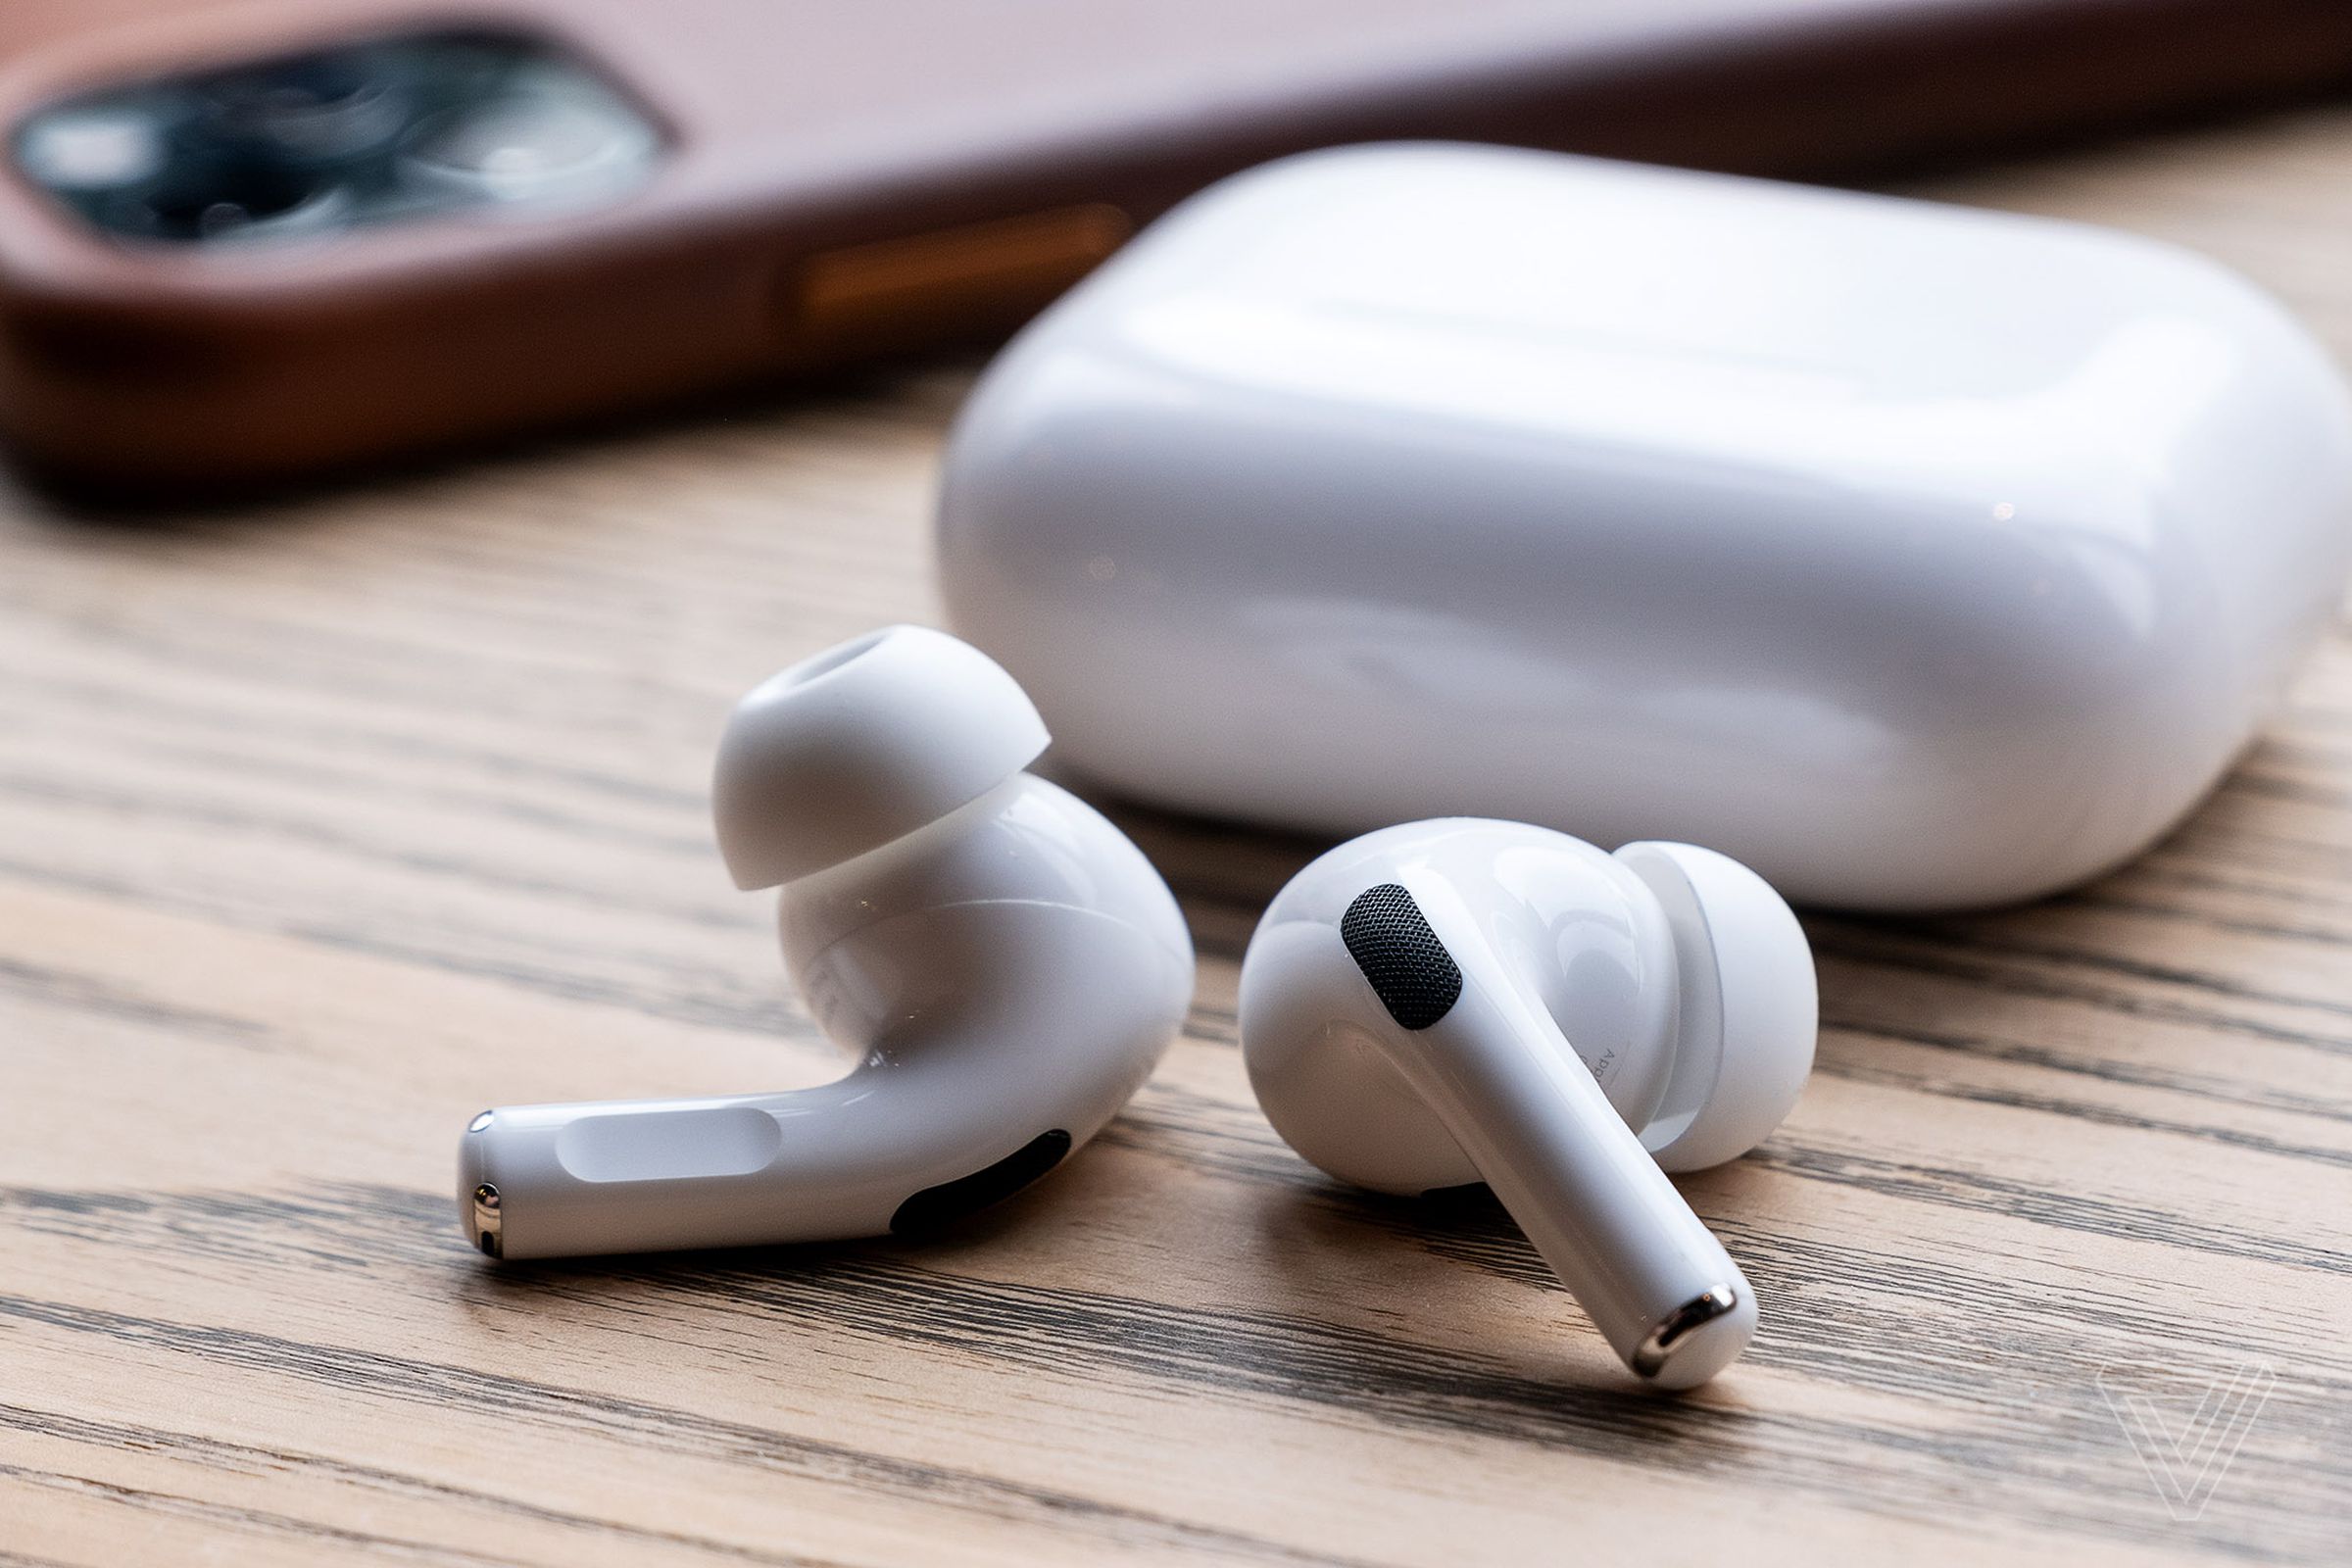 Apple’s second-gen AirPods are down to $99.99 and the AirPods Pro down to $174.